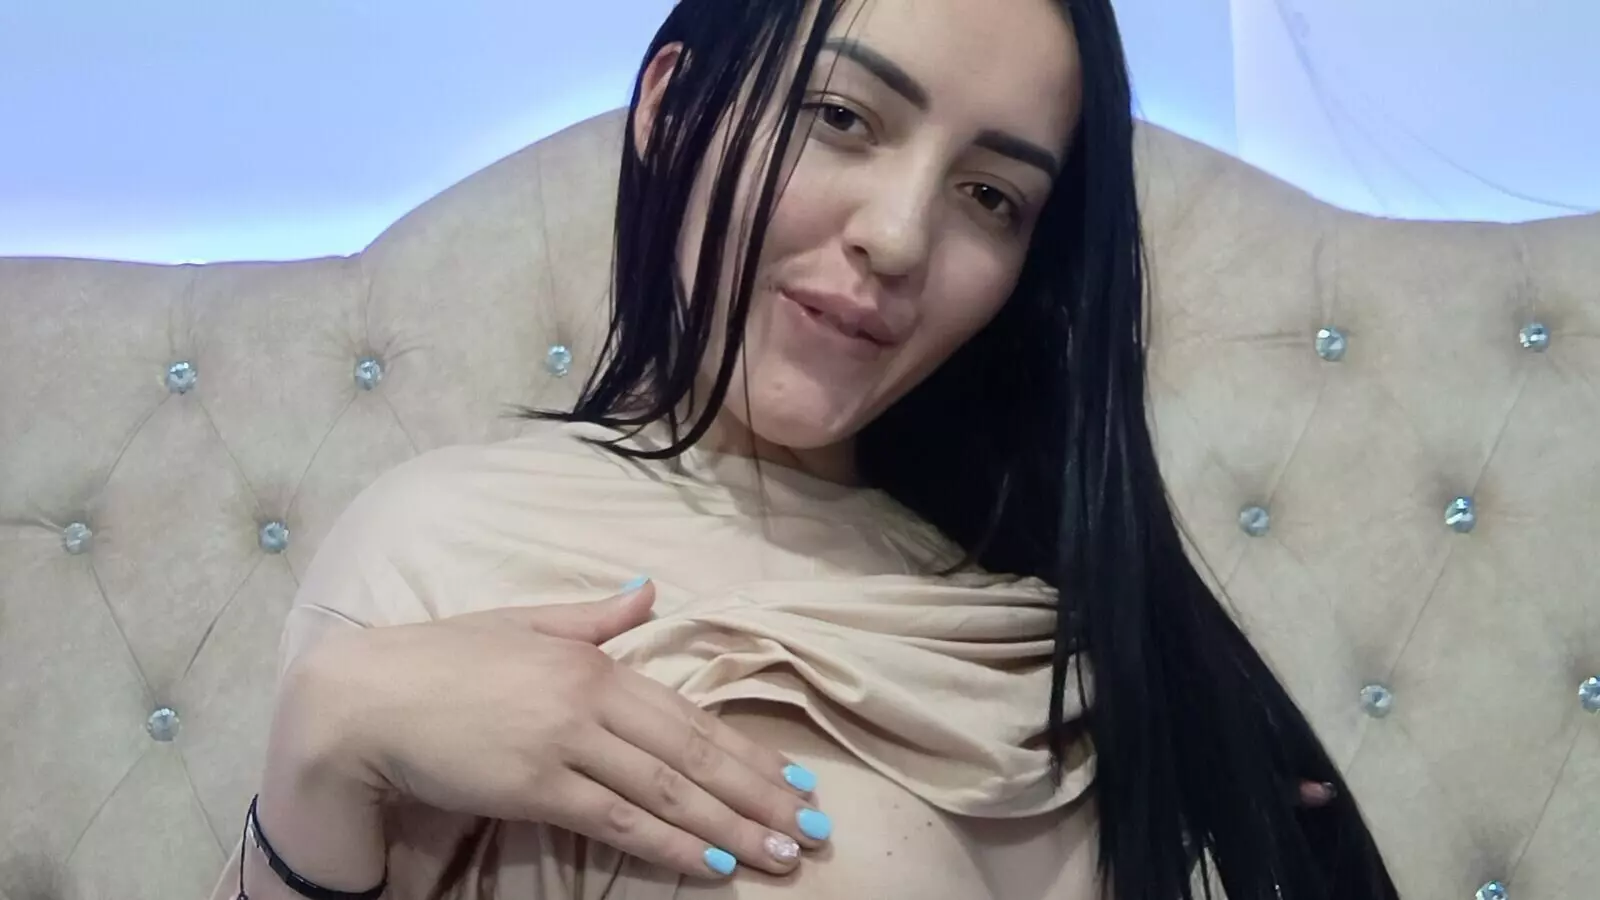  RELATED VIDEOS - WEBCAM MarlyJhons STRIPS AND MASTURBATES